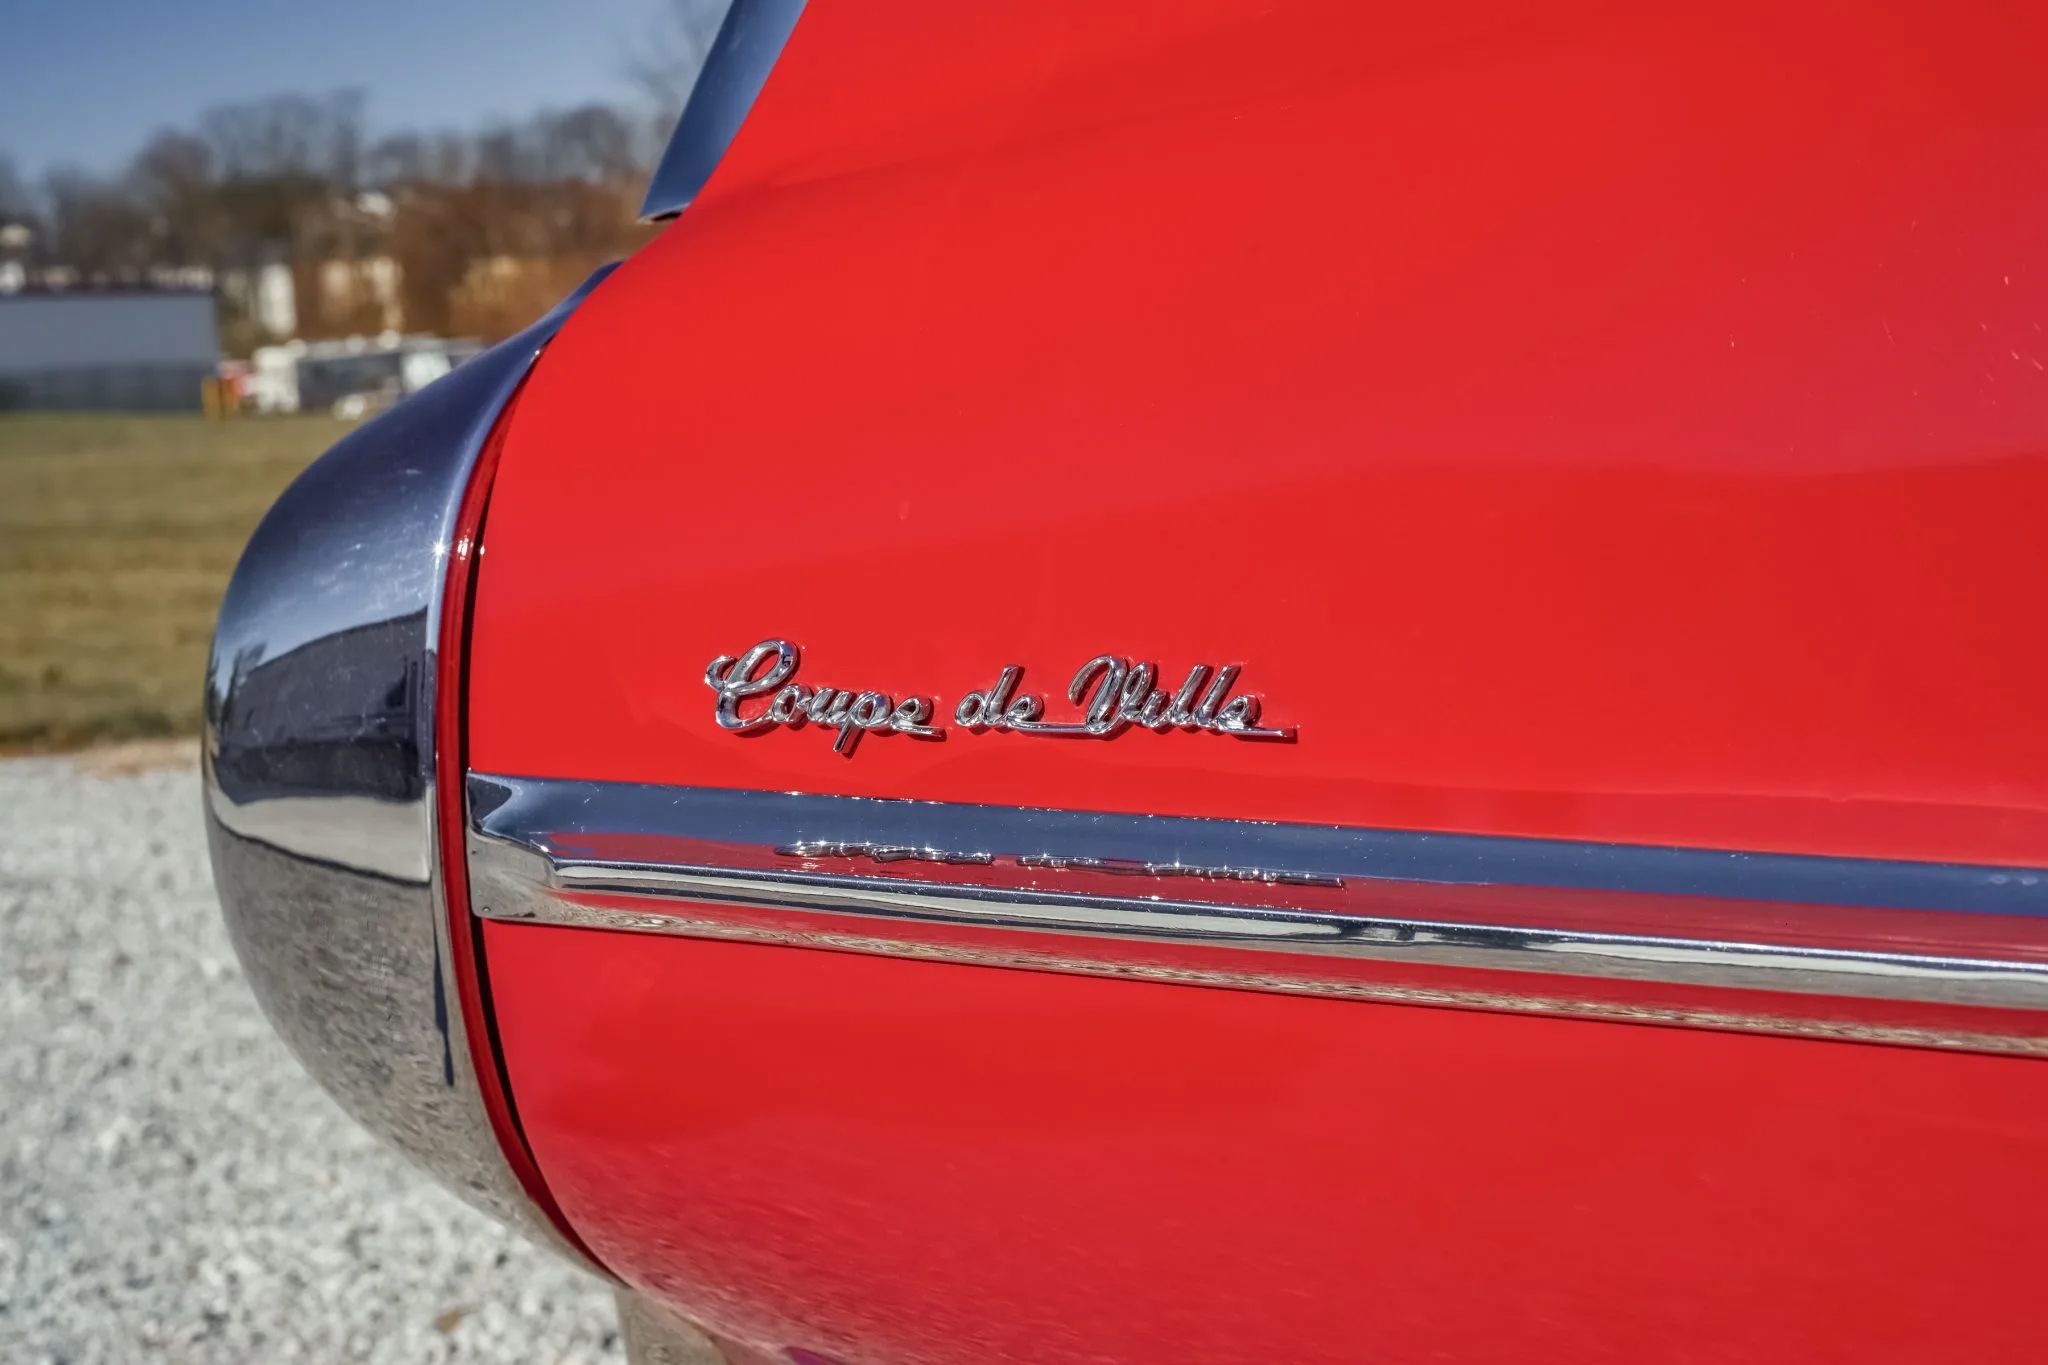 1959 Cadillac Coupe Deville decal